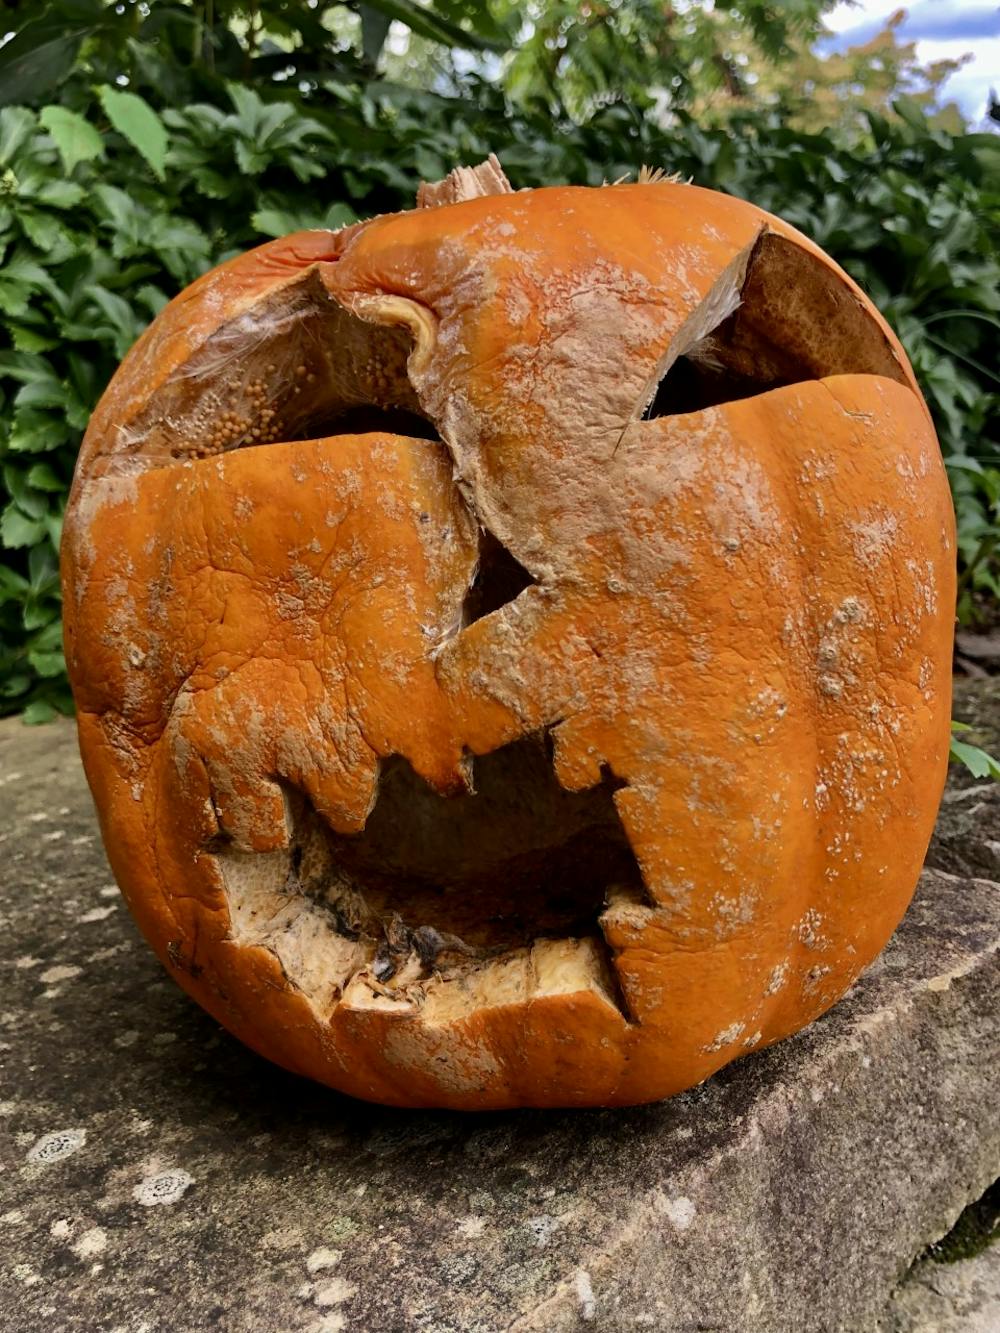 How To Keep Your Jack O Lantern From Turning Into Moldy Maggoty Mush Before Halloween